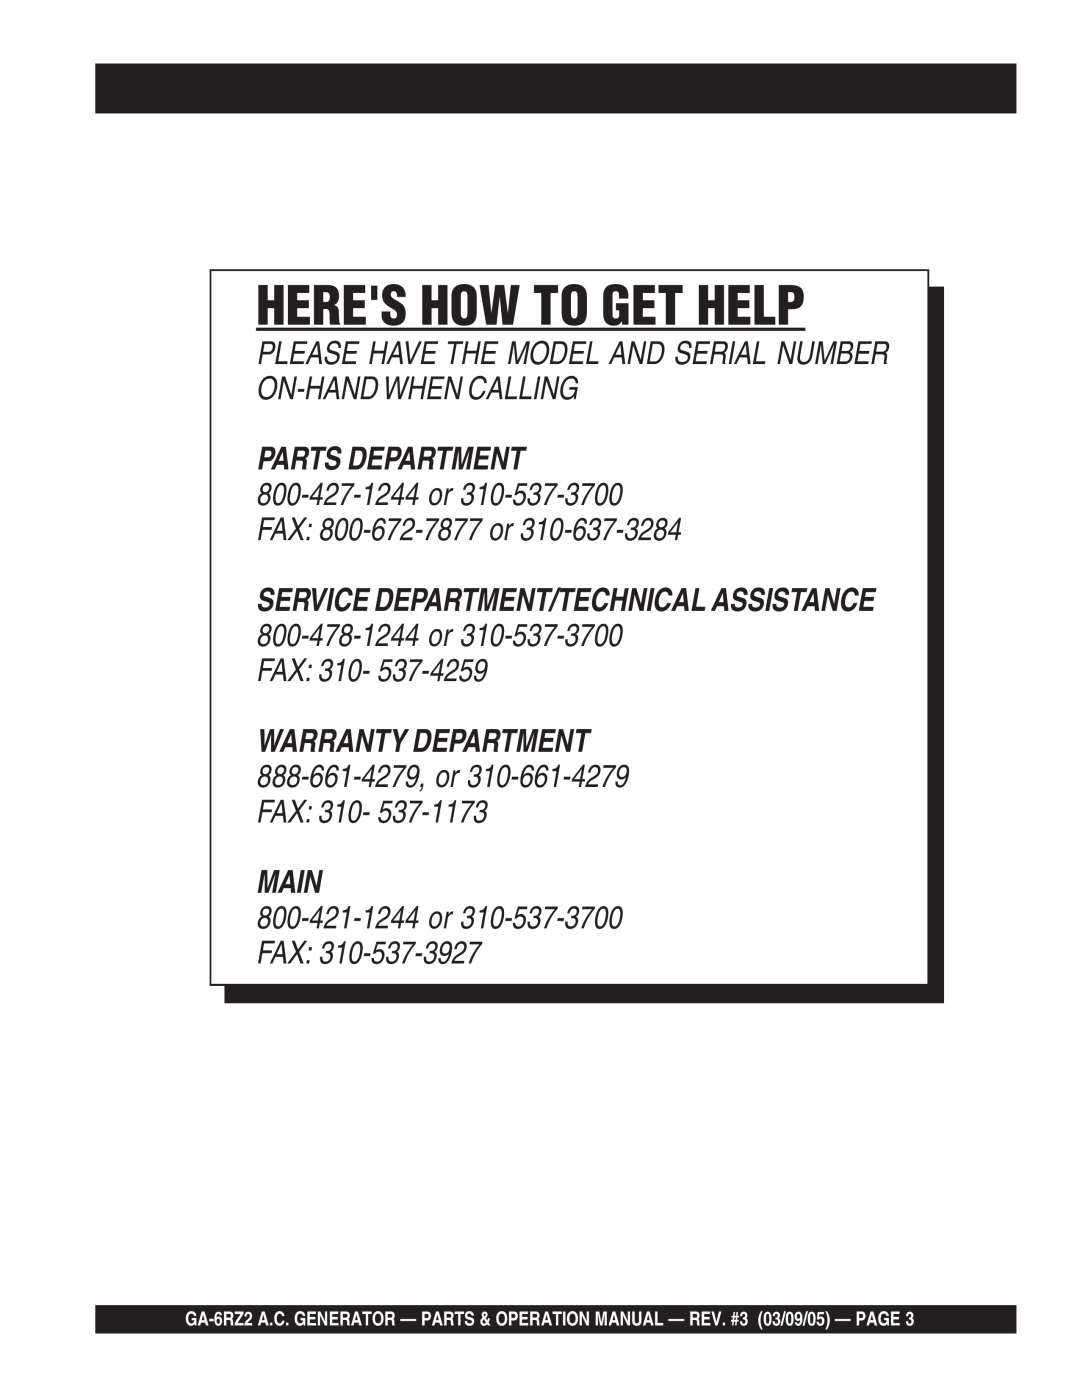 Multiquip GA-6RZ2 operation manual Heres How To Get Help, Fax, Parts Department, Main, 800-421-1244or 310-537-3700FAX 